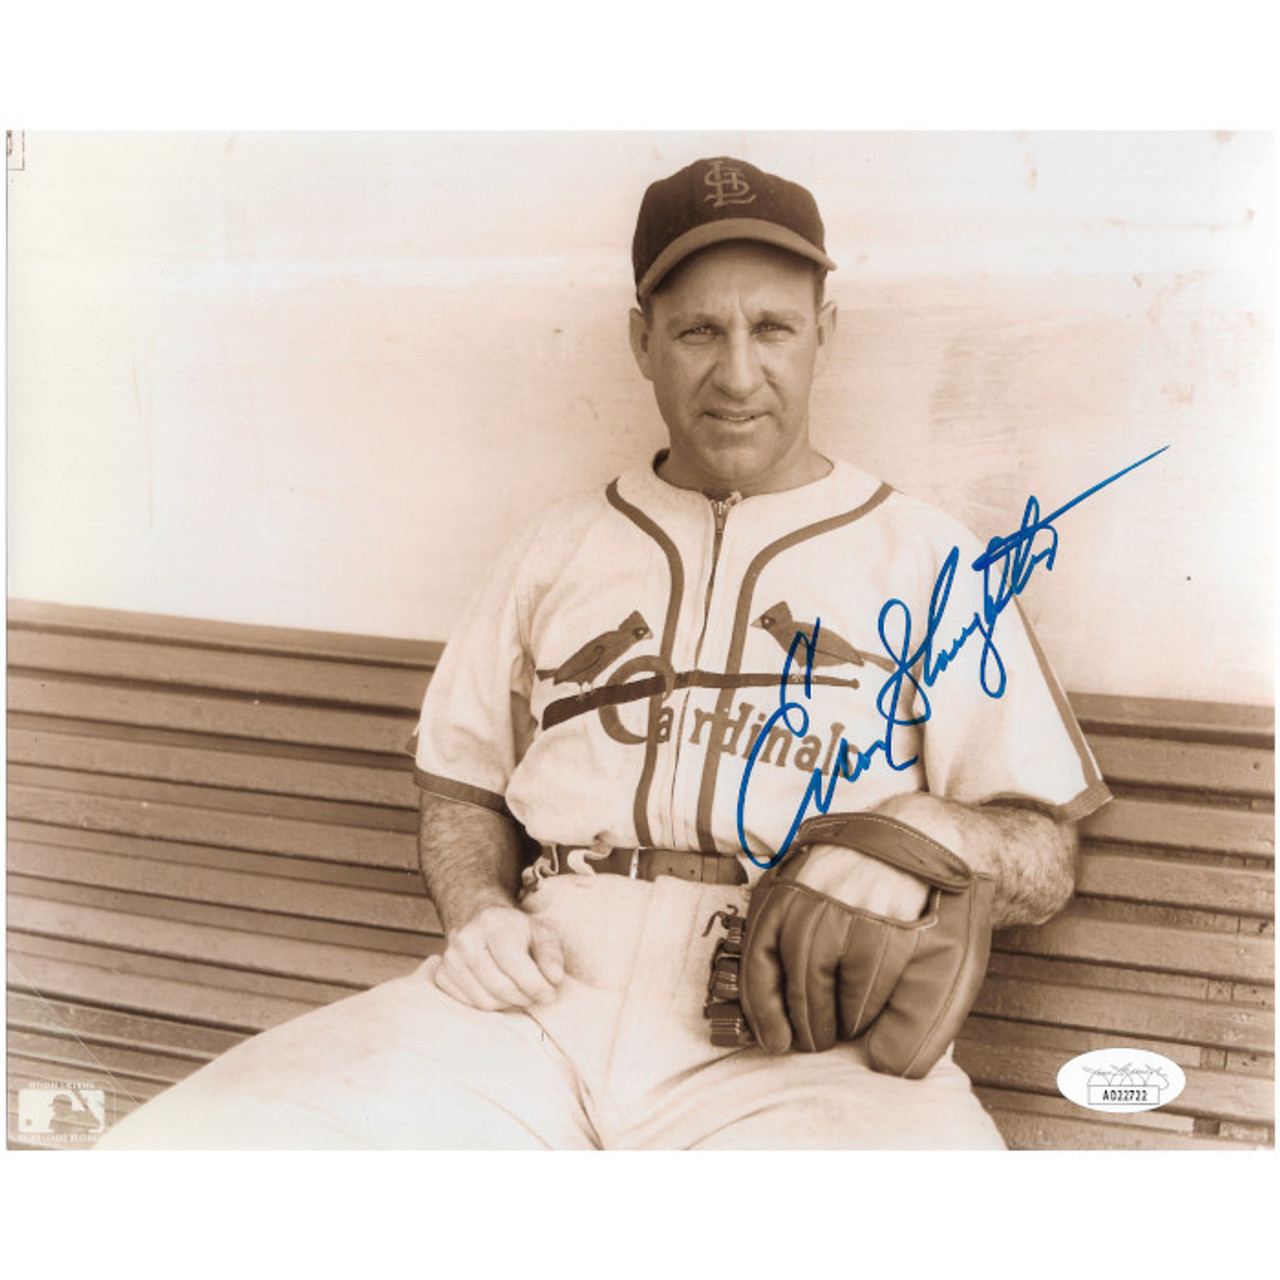 Enos Slaughter - St. Louis Cardinals signed 8x10 photo  Pittsburgh Sports  Gallery Mr Bills Sports Collectible Memorabilia